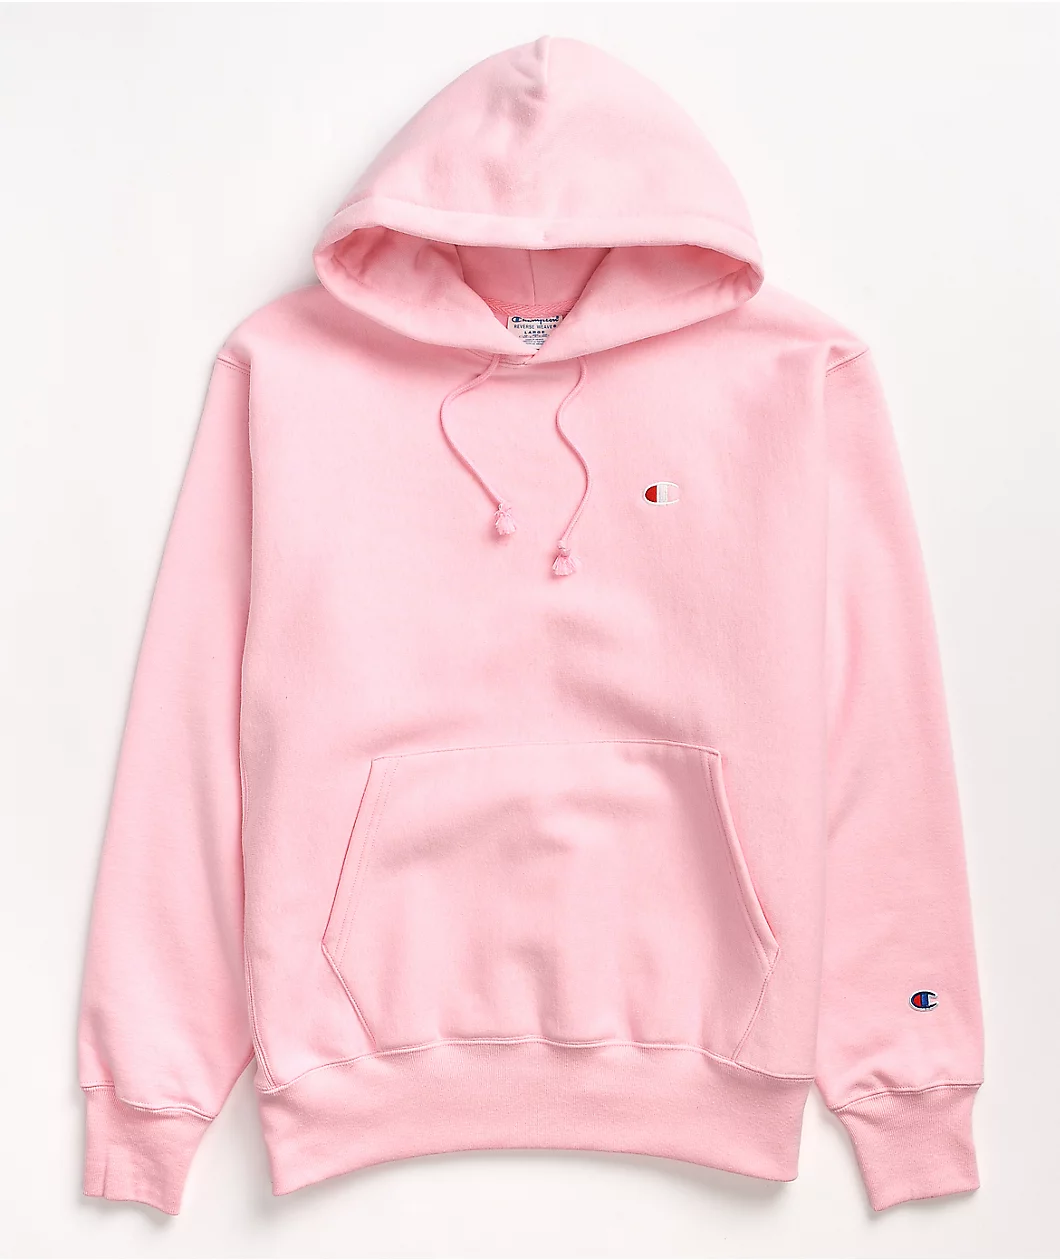 50% OFF the Champion Reverse Weave Hoodie 